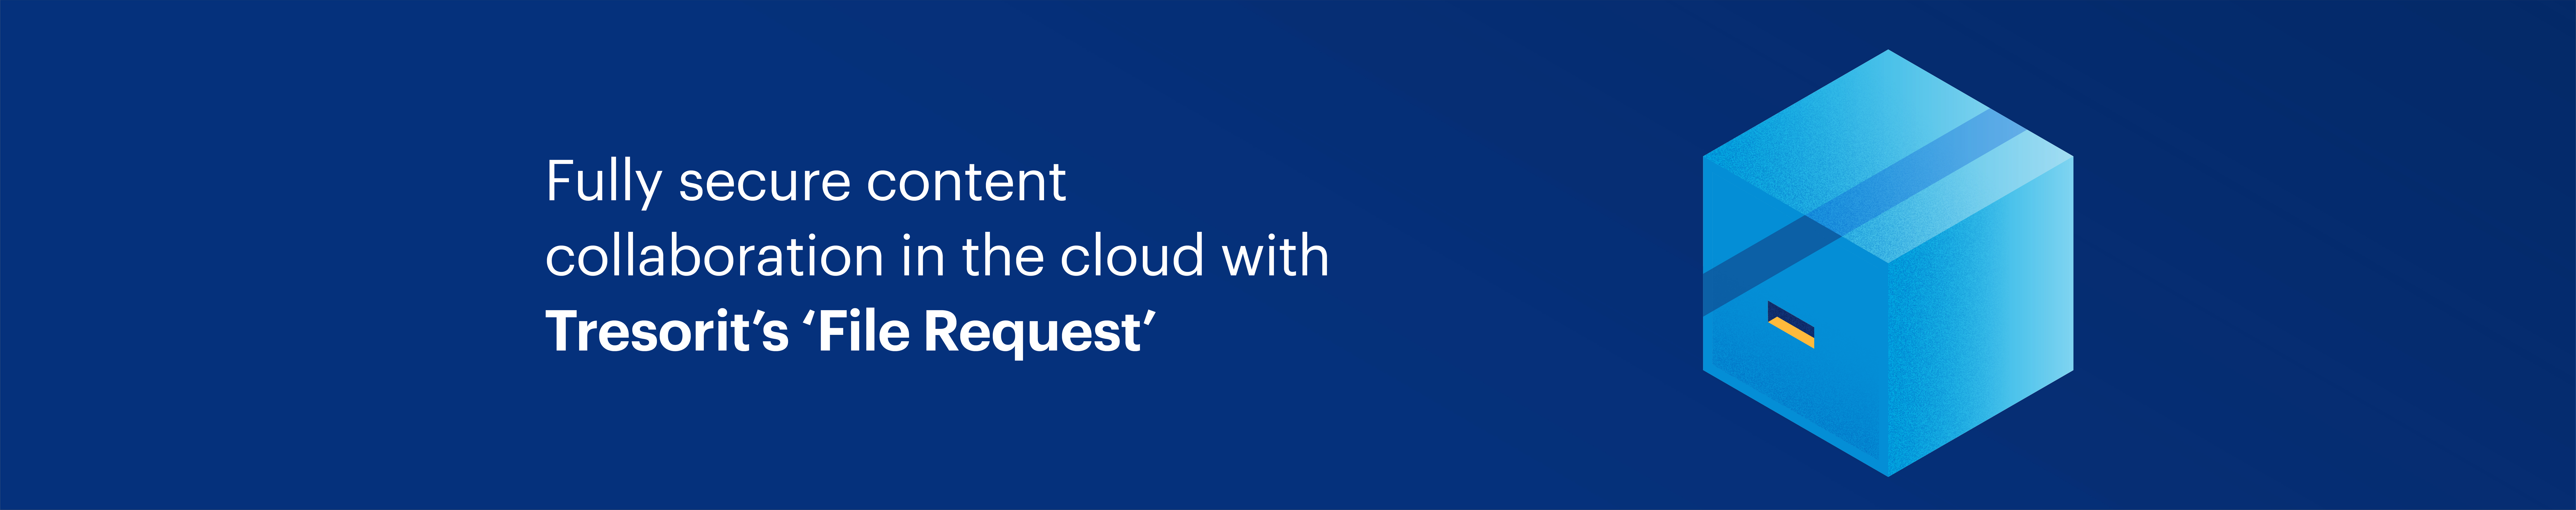 Fully secure content collaboration in the cloud with Tresorit’s ‘File Request’